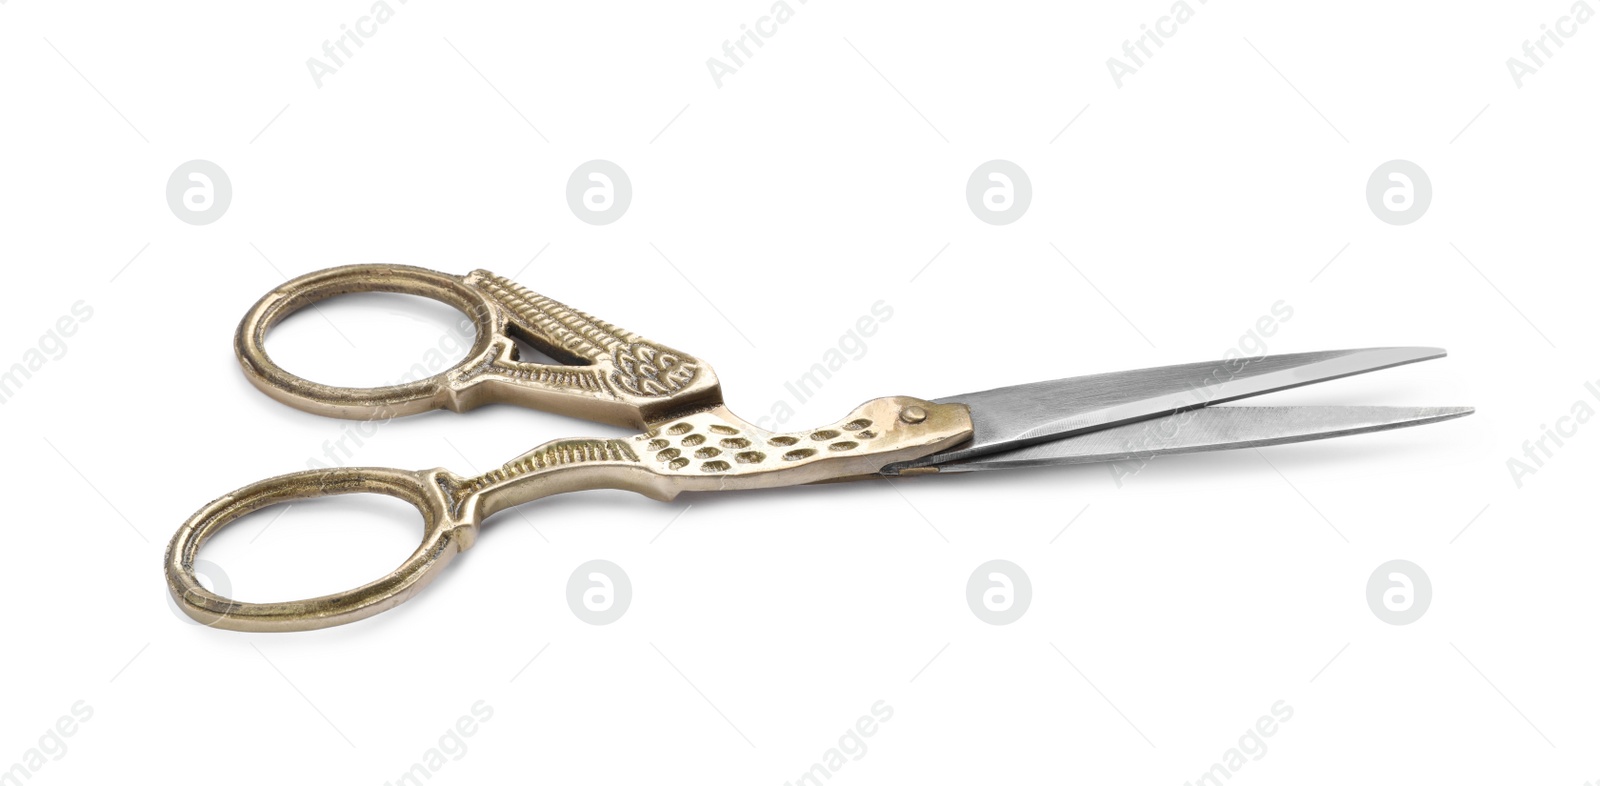 Photo of Pair of scissors with ornate handles isolated on white